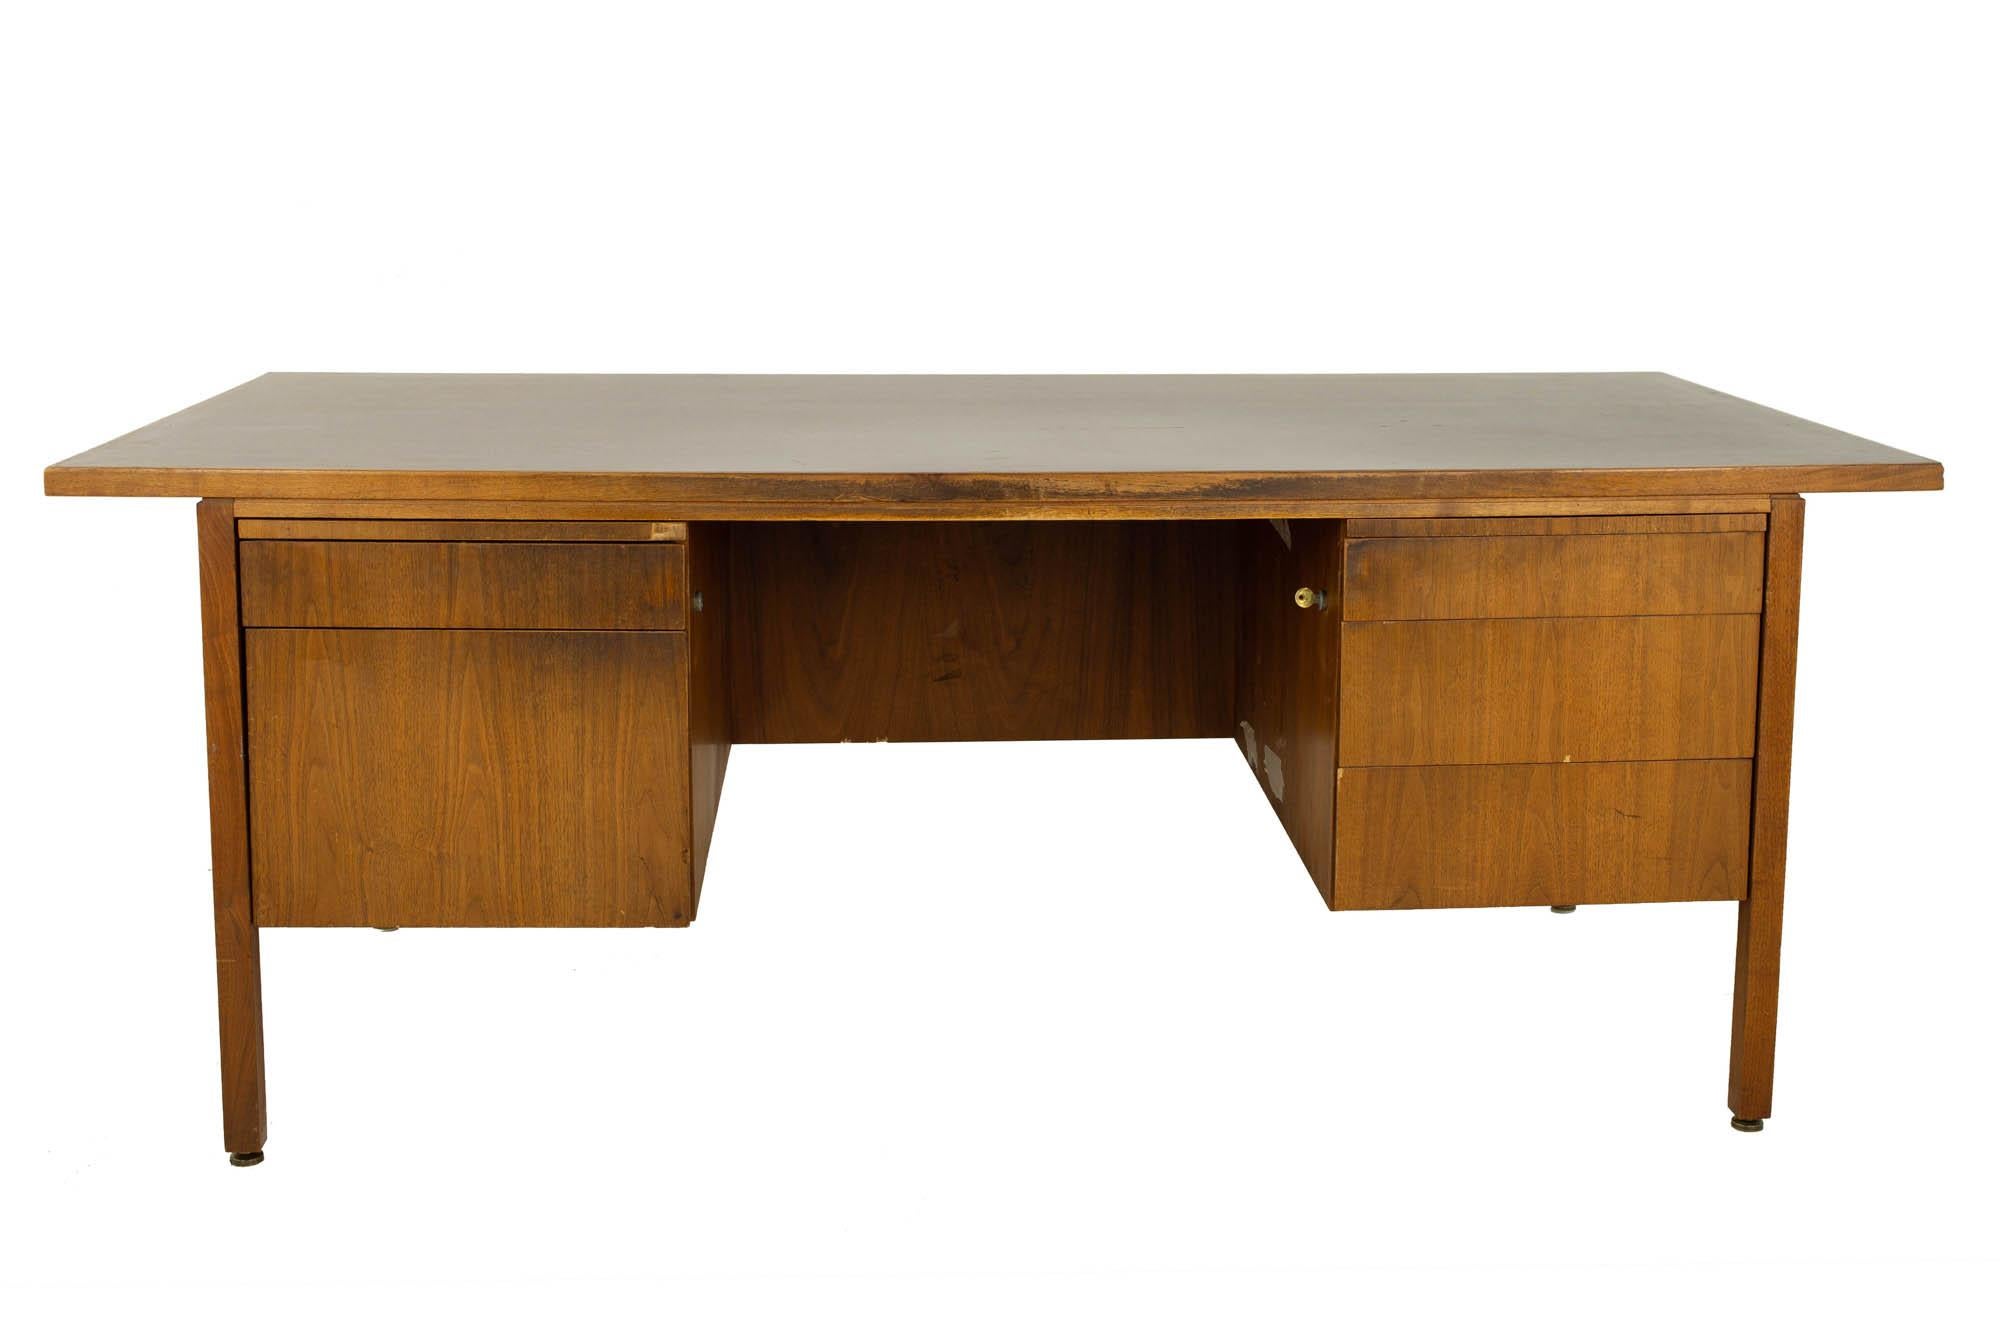 Jens Risom style mid century walnut and laminate executive desk

This desk measures: 78 wide x 38 deep x 29.25 inches high, with a chair clearance of 27 inches

?All pieces of furniture can be had in what we call restored vintage condition. That